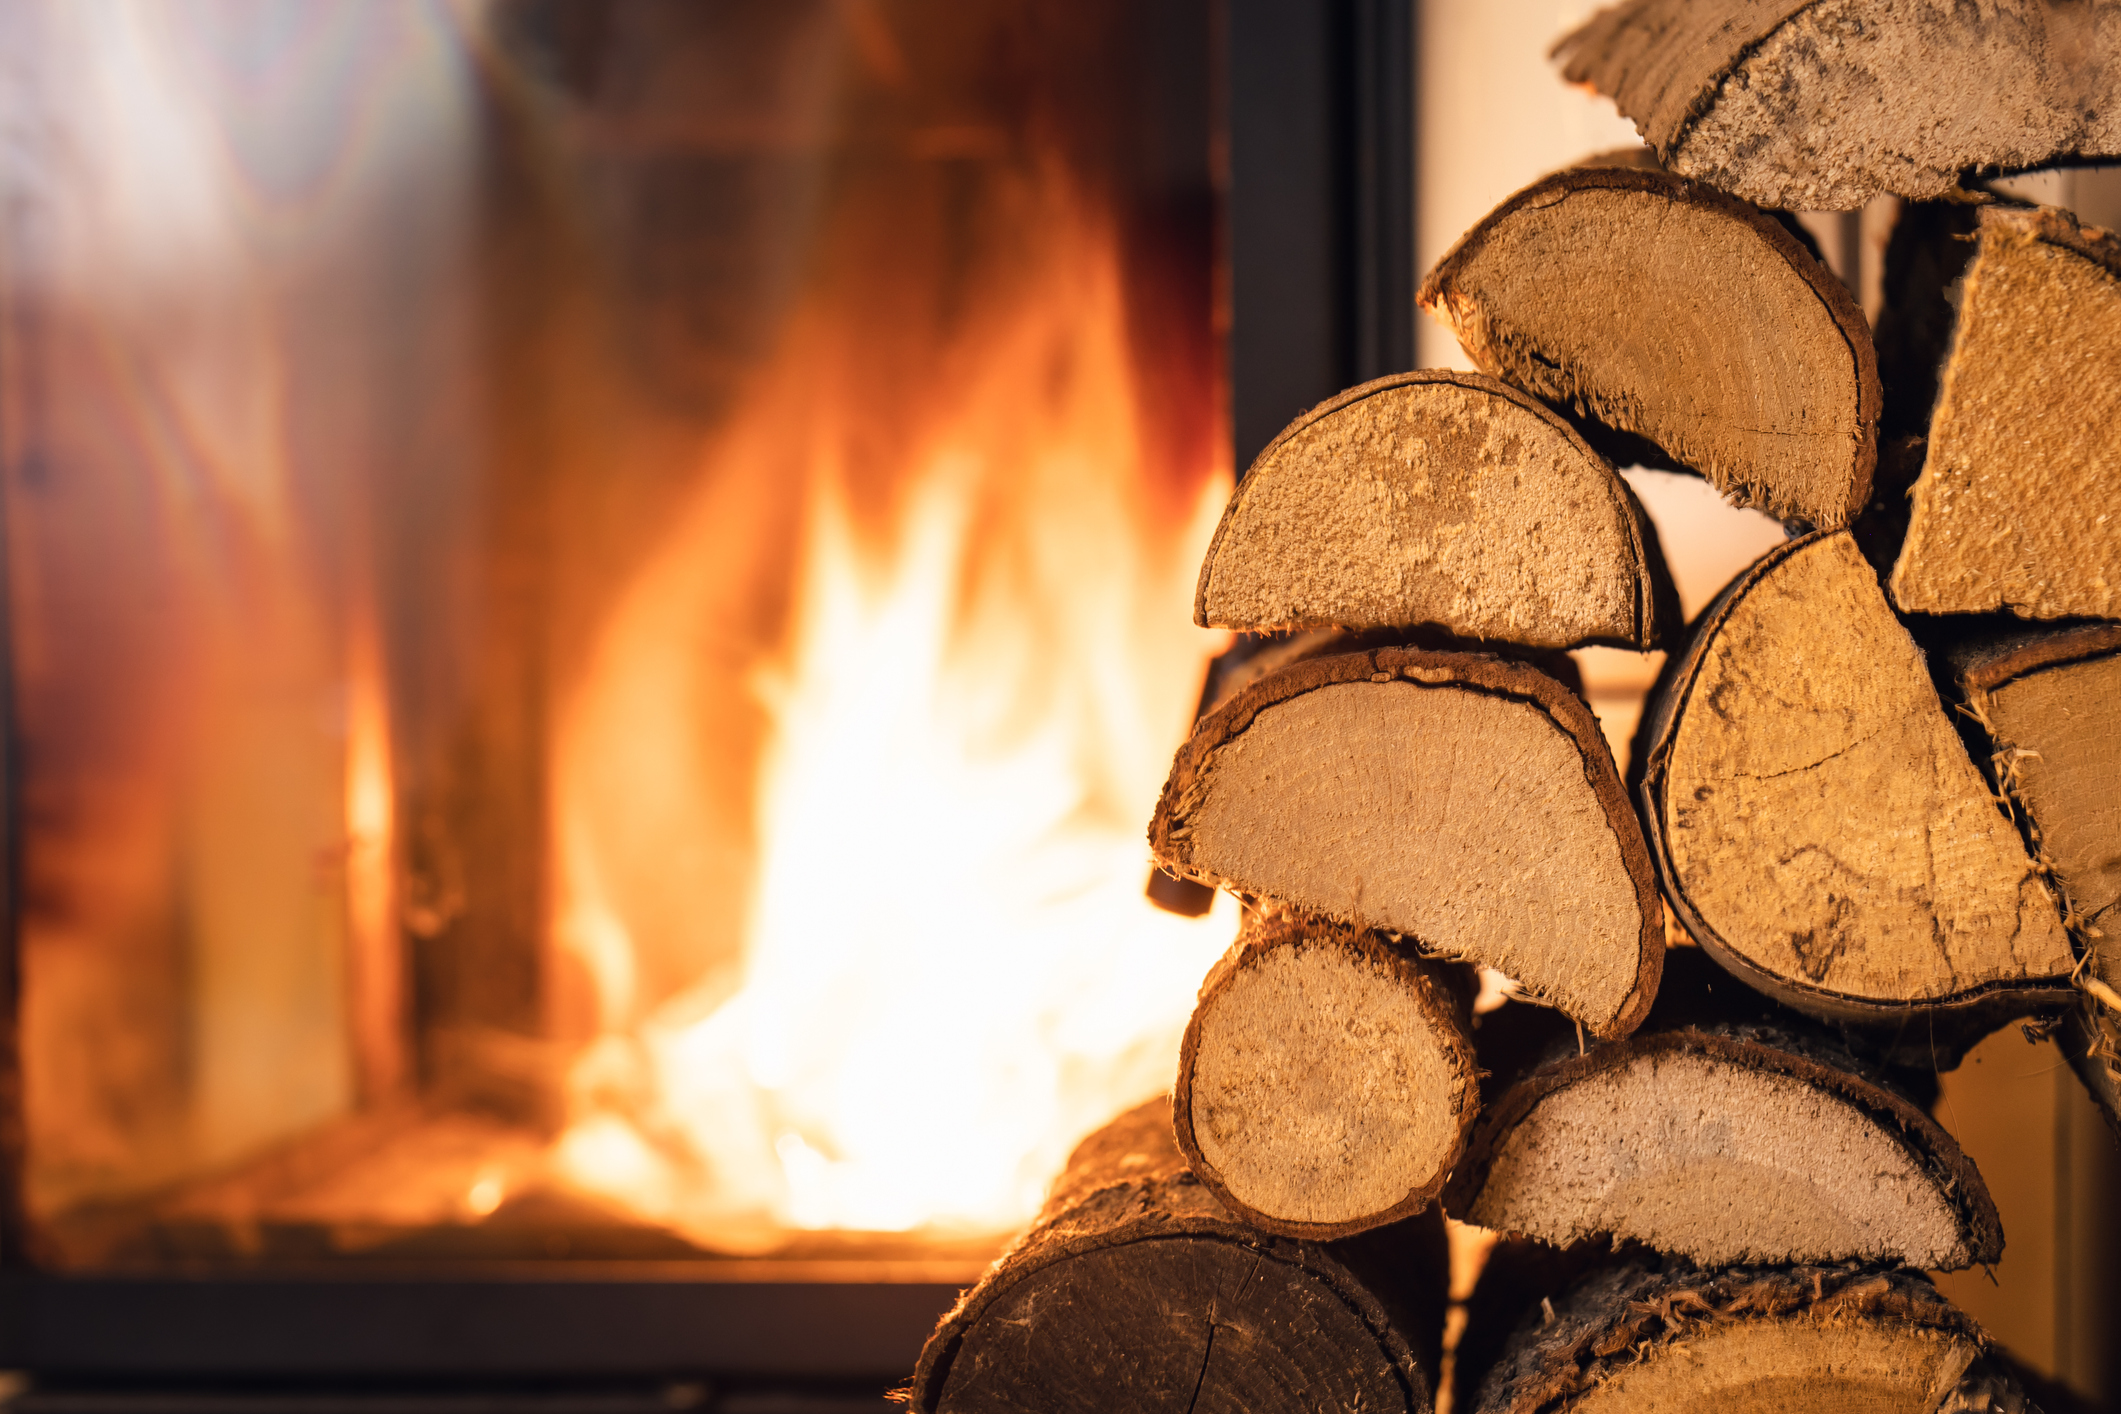 Firewood stack in front of stove. (Photo: iStock - Bastian Weltjen)